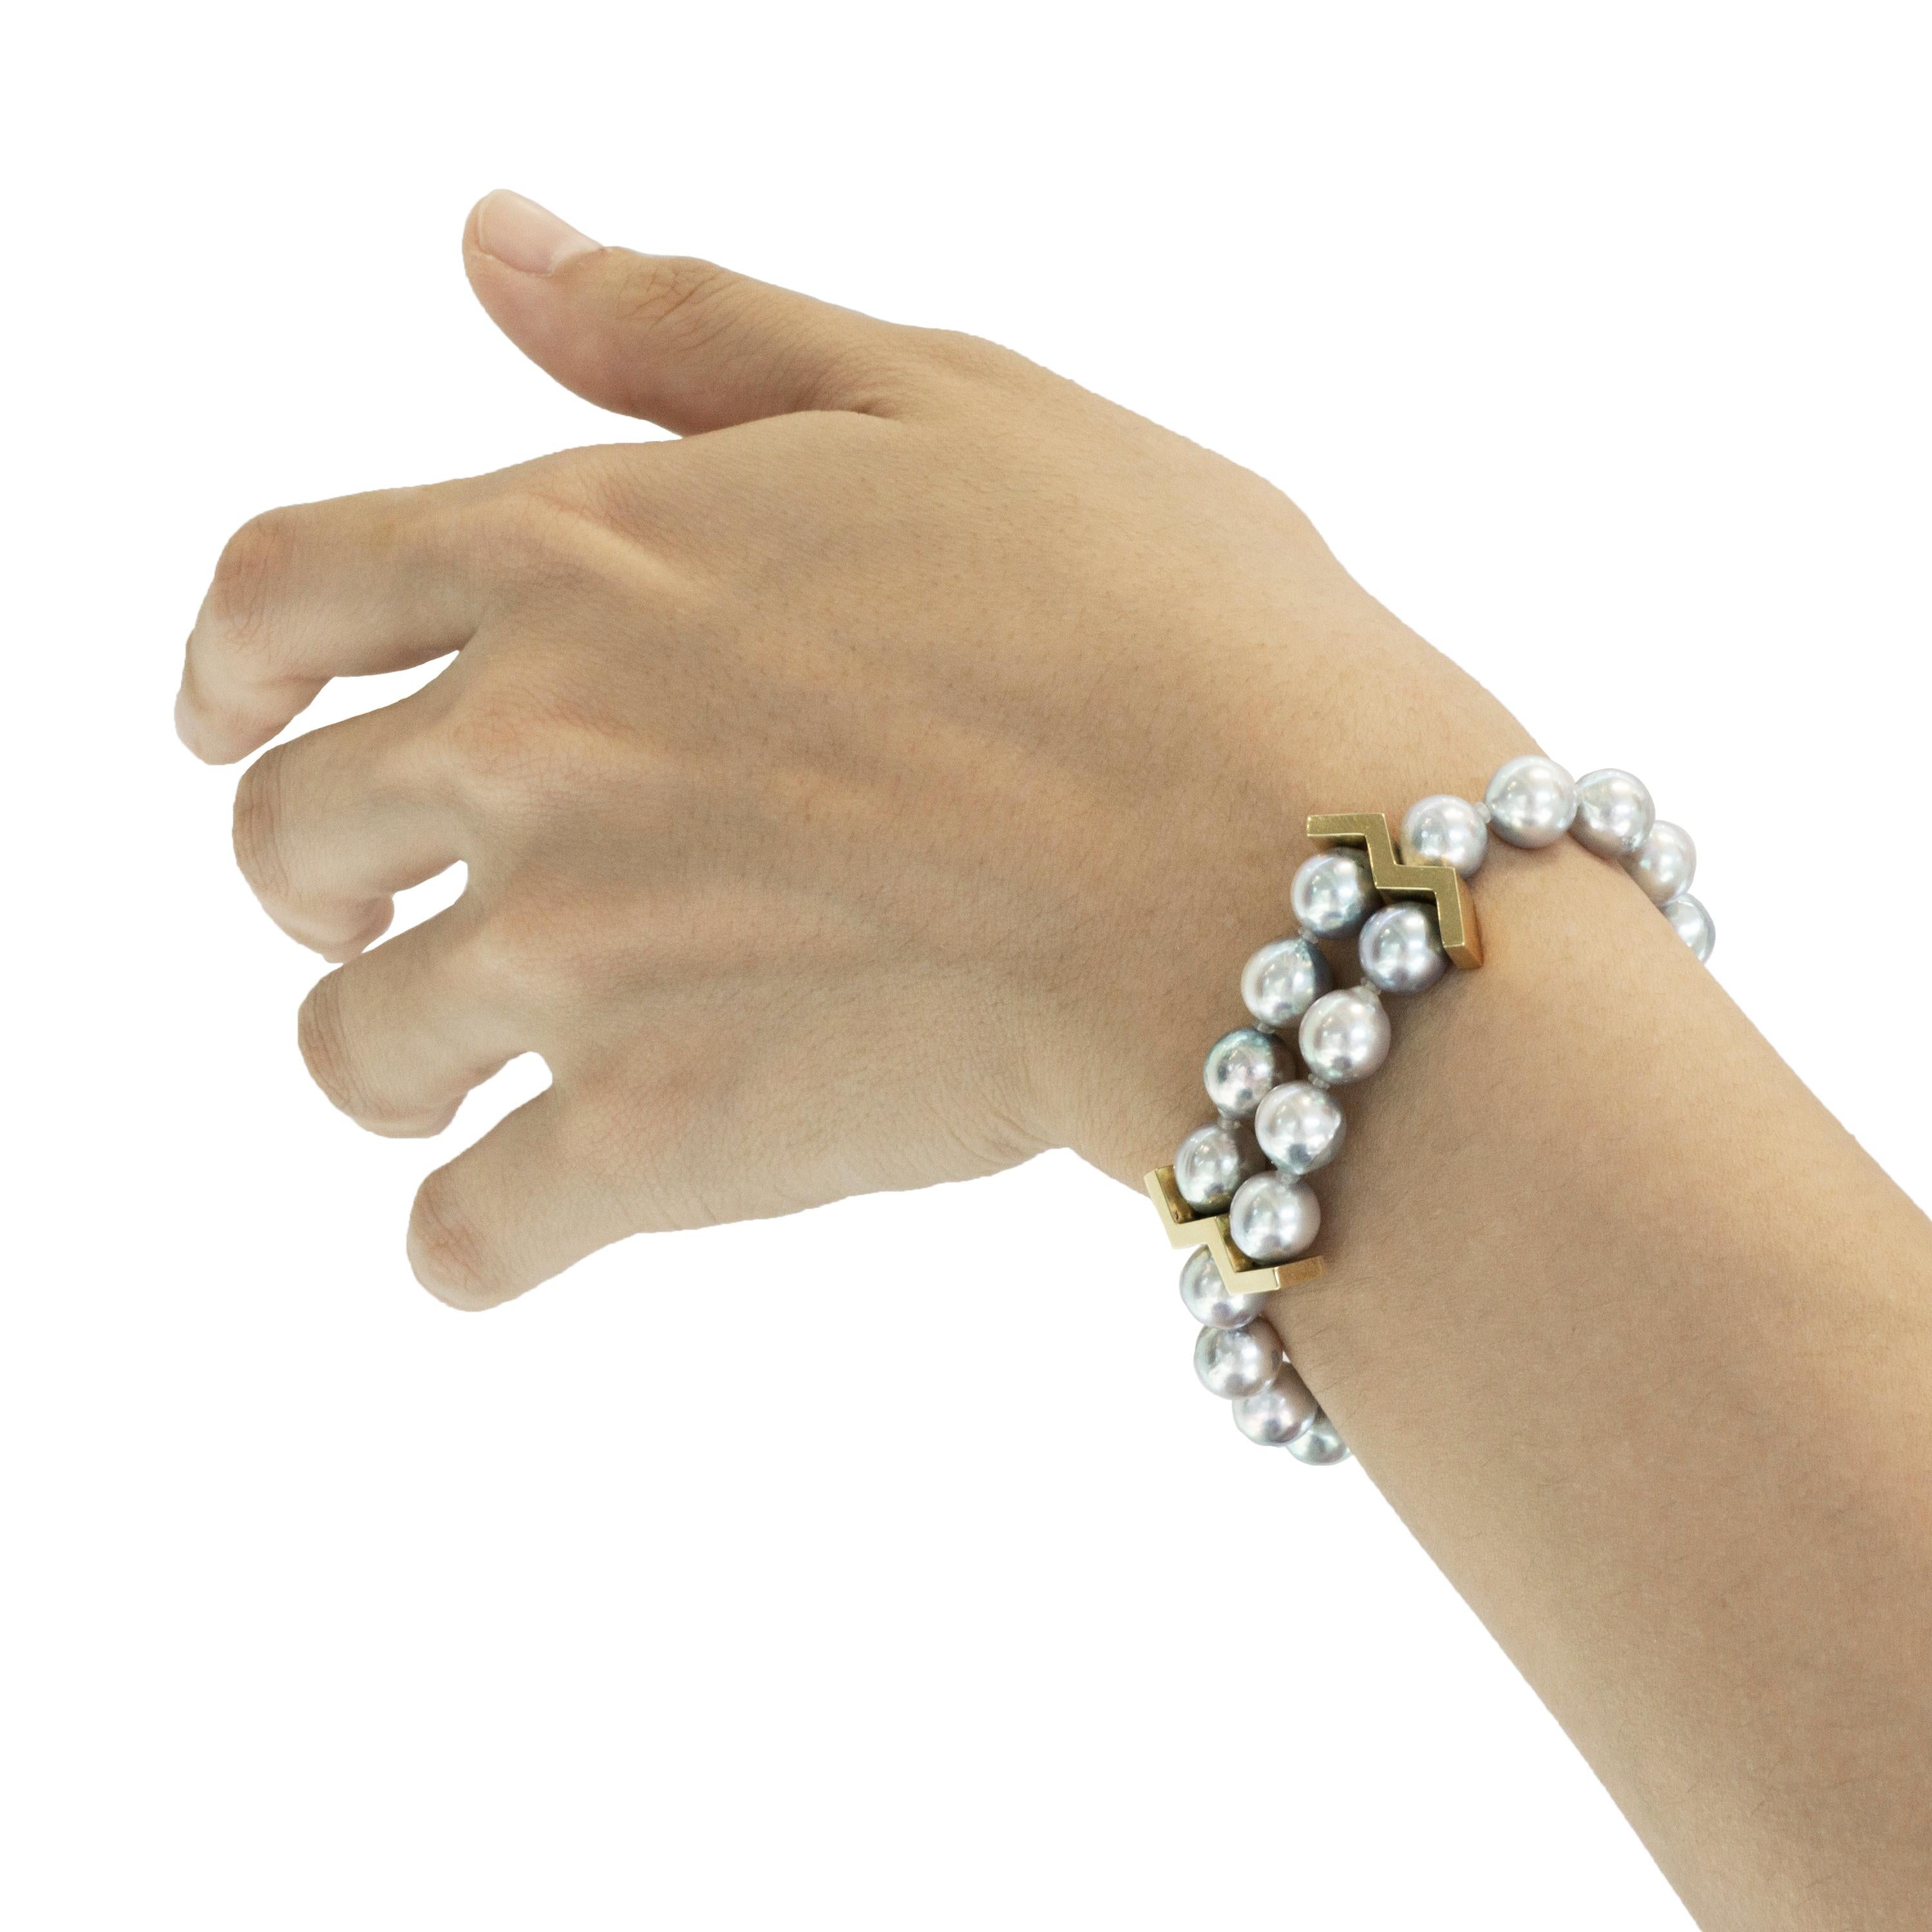 Elegant natural Akoya pearls of a stunning silver grey hue make  this unique bracelet. It features double strands in the center that graduate into one strand with the Madan signature M findings and a fully integrated 18 karat gold fish-hook clasp